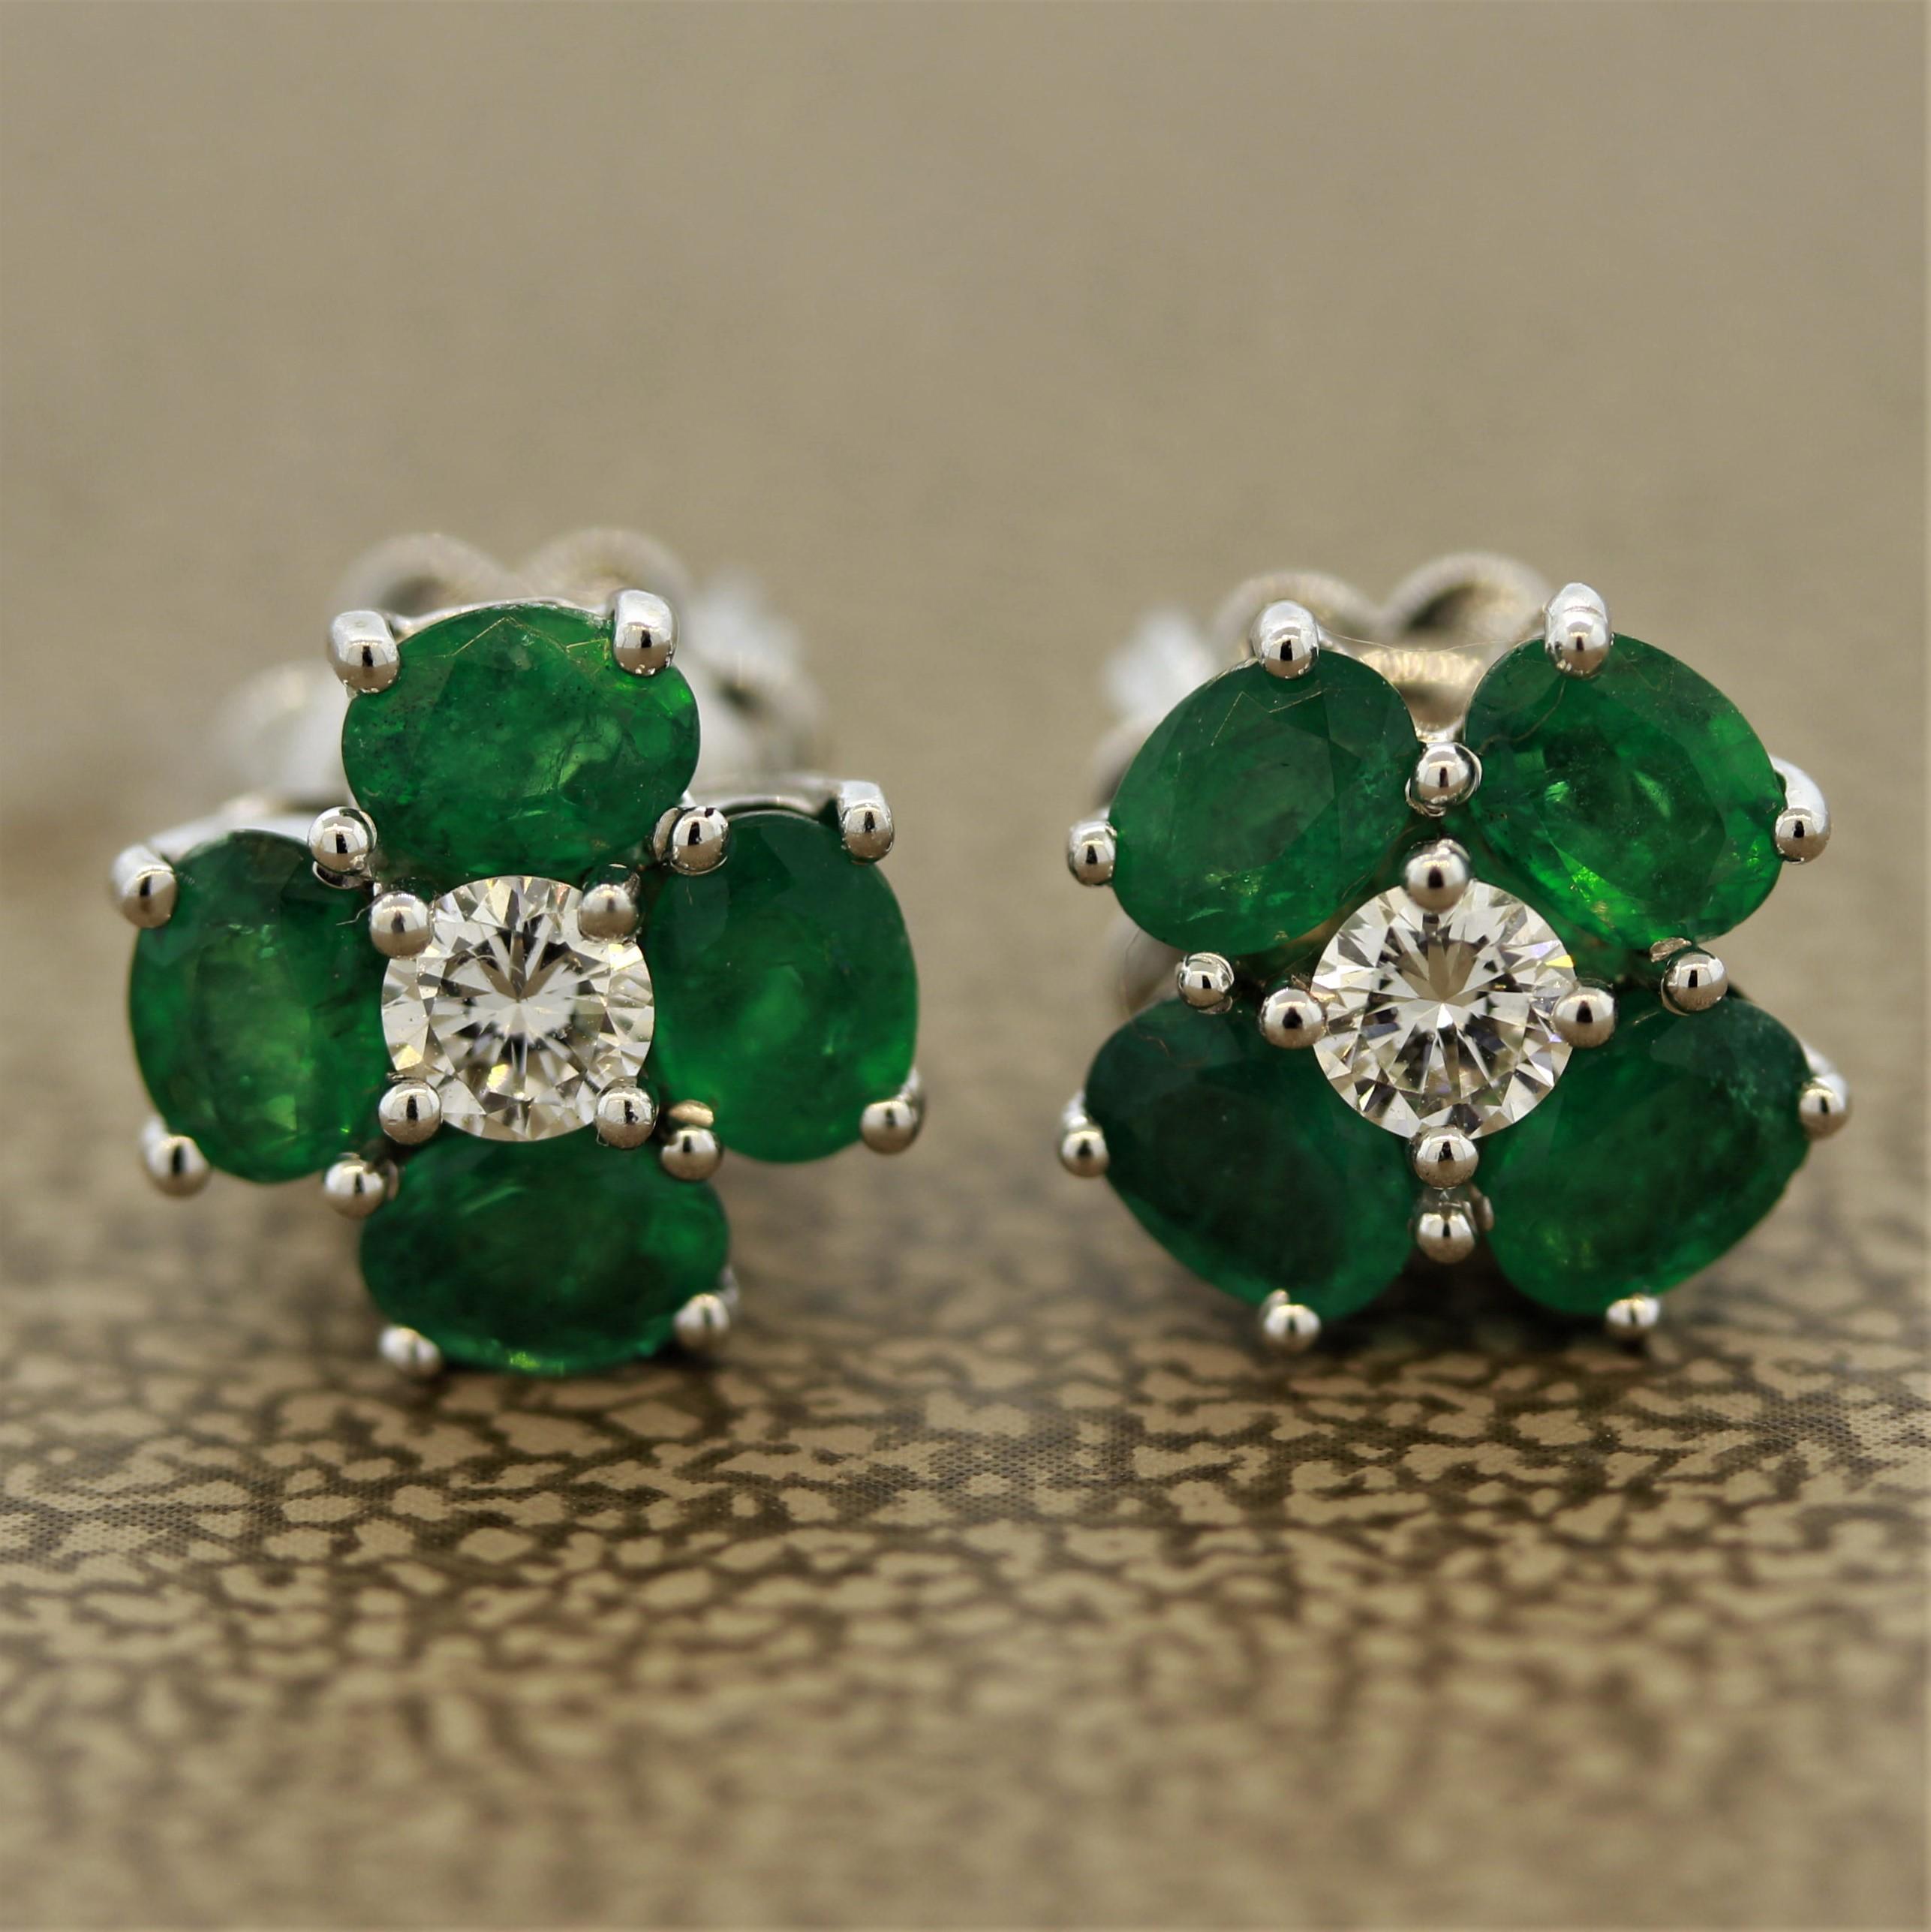 A lovely pair of earrings featuring fine emeralds with a bright and vivid green color. They are accented by a round brilliant cut diamond in the center and the gems weigh a total of 1.50 carats. 

Made in 18k white gold.